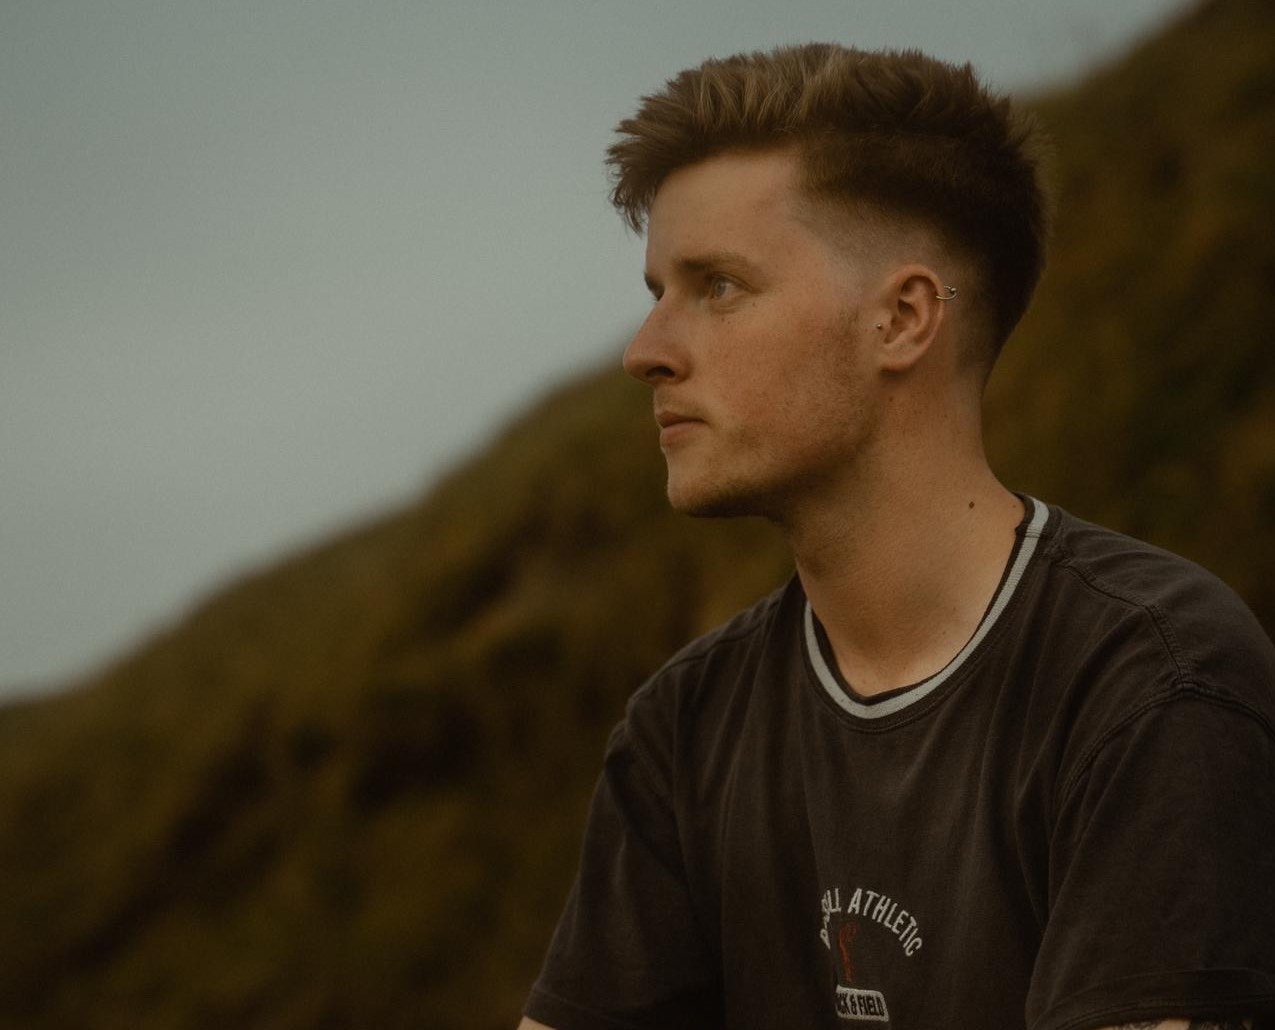 Billy Hurley new single ‘Favourite Place To Be’ is out now